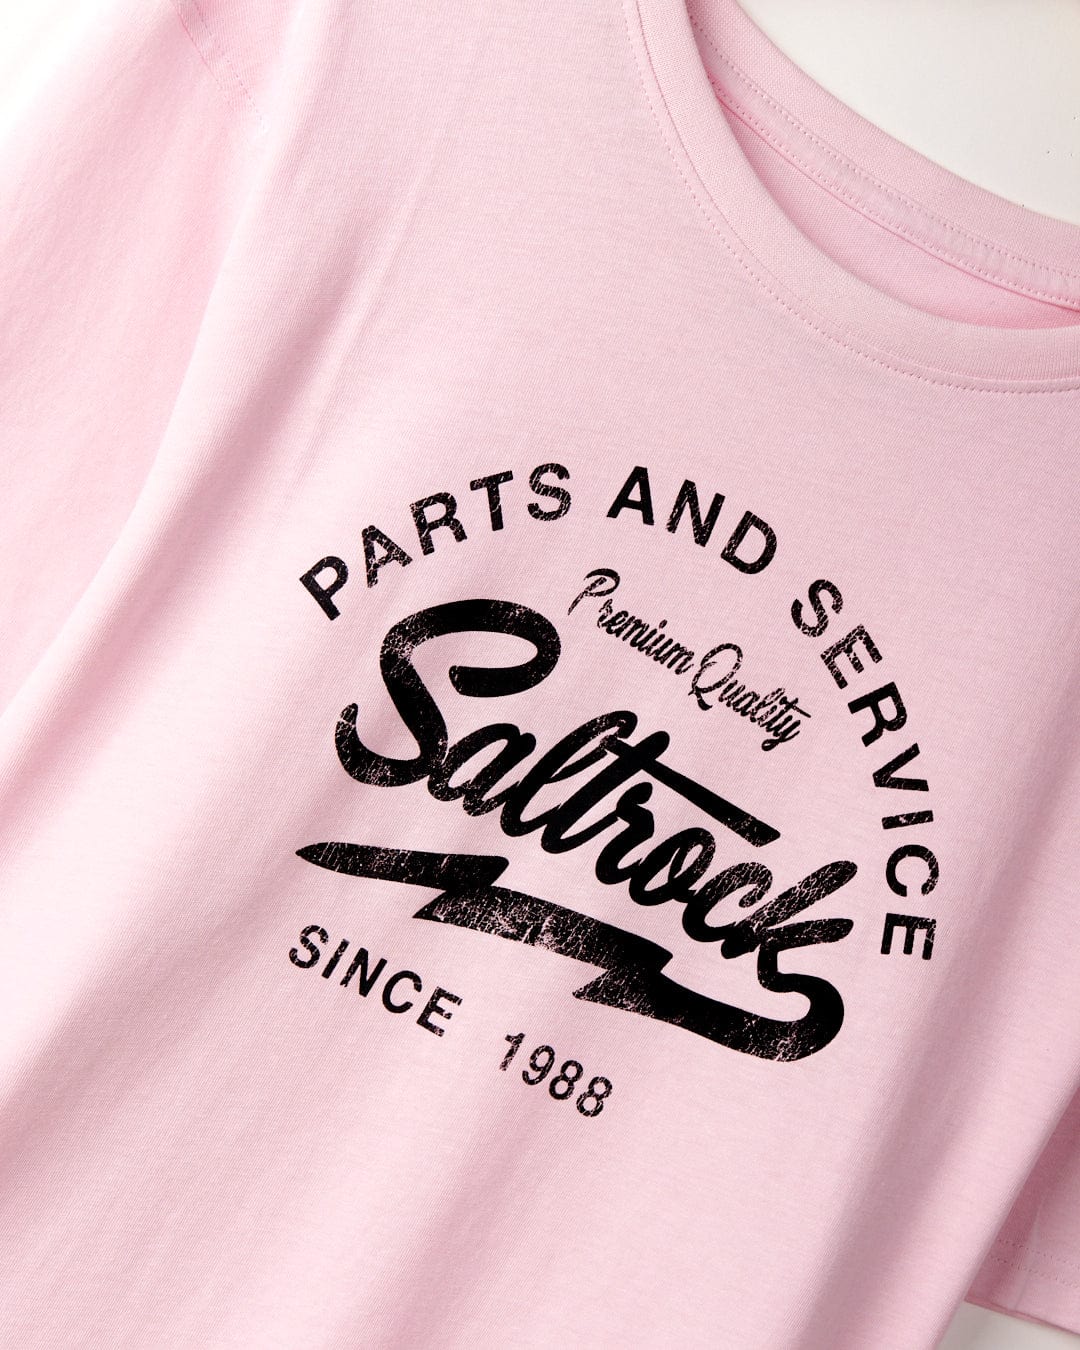 Close-up of a pink T-shirt showcasing Saltrock branding with "Parts and Service," "Saltrock," "Premium Quality," and "Since 1988" printed in black. Made from 100% cotton for ultimate comfort. This is the Strike Logo - Mens T-Shirt - Pink by Saltrock.